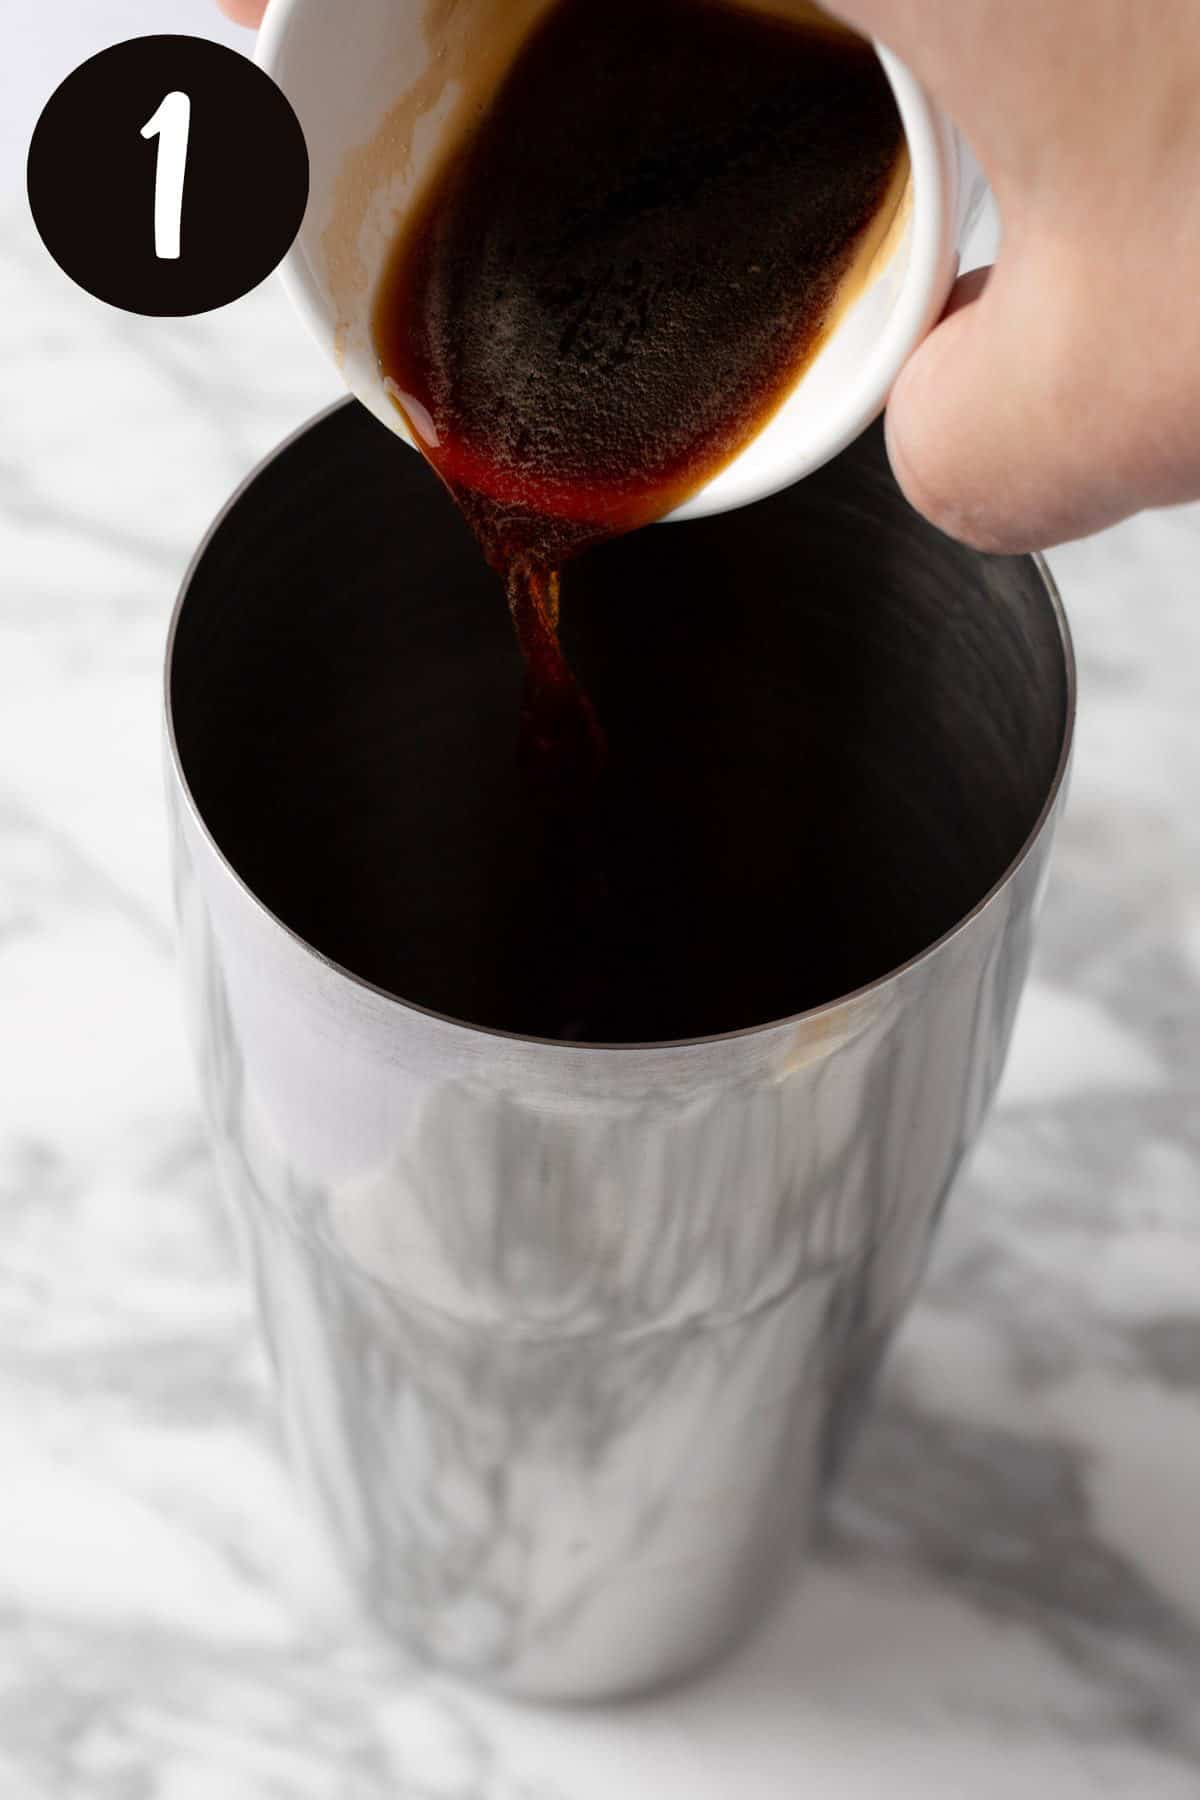 Pouring the espresso into a metal cocktail shaker.